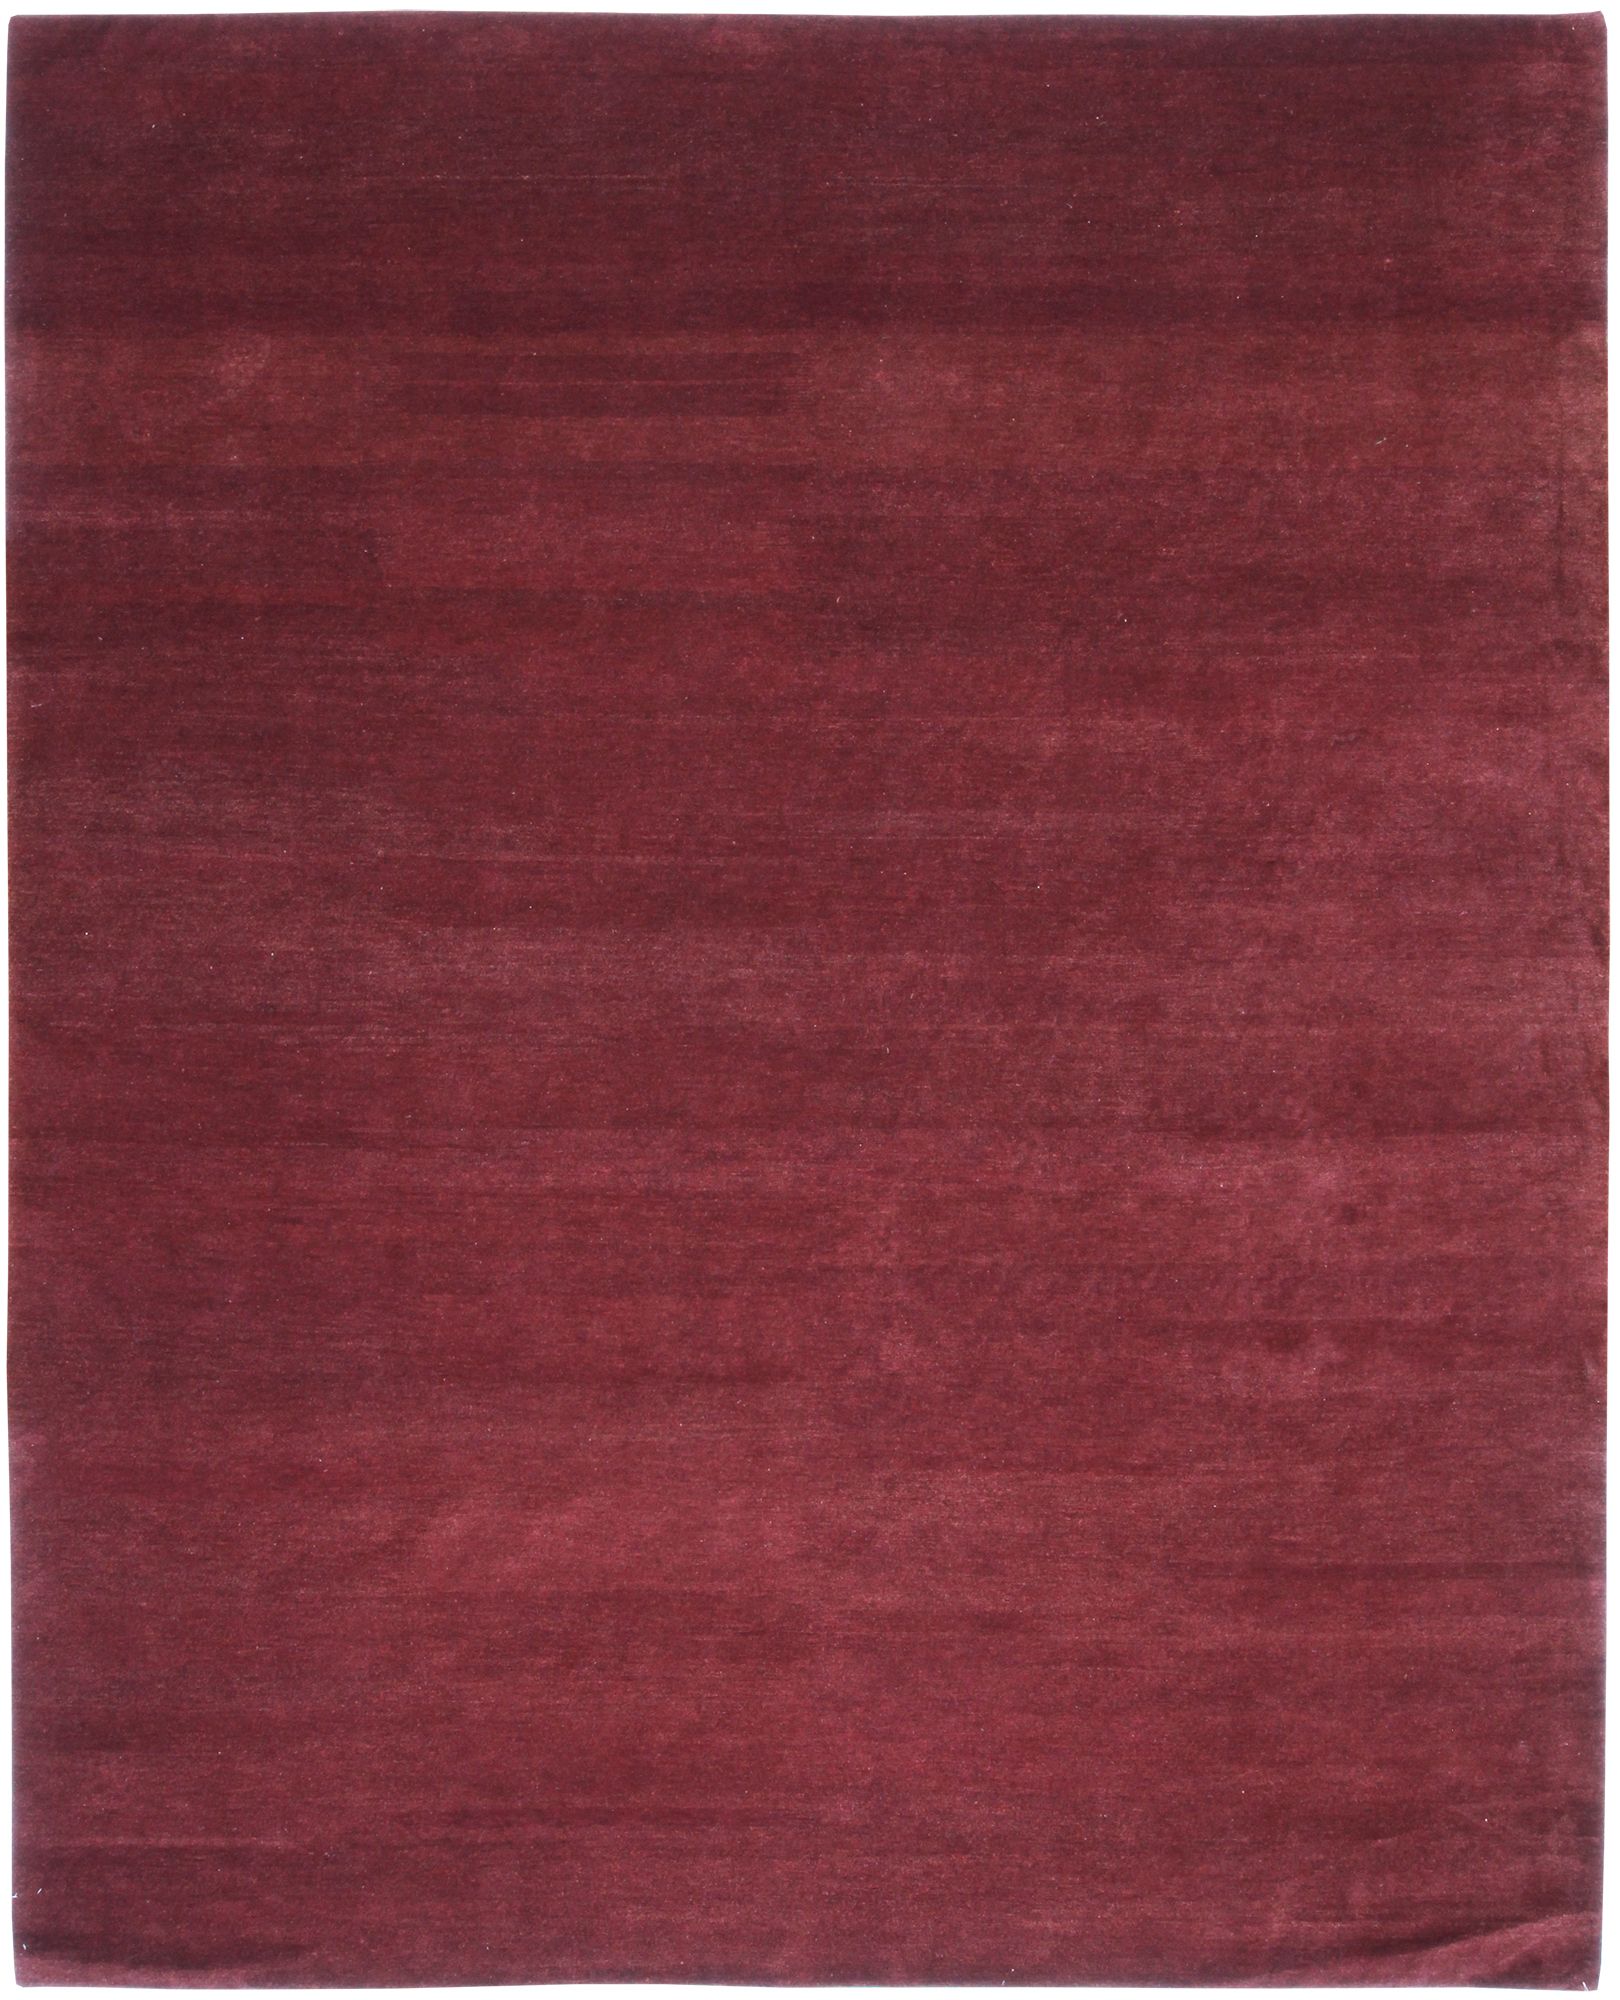 Solid Burgundy 9x12 Wool Area Rug | Turco Persian With Regard To Burgundy Rugs (Photo 2 of 15)